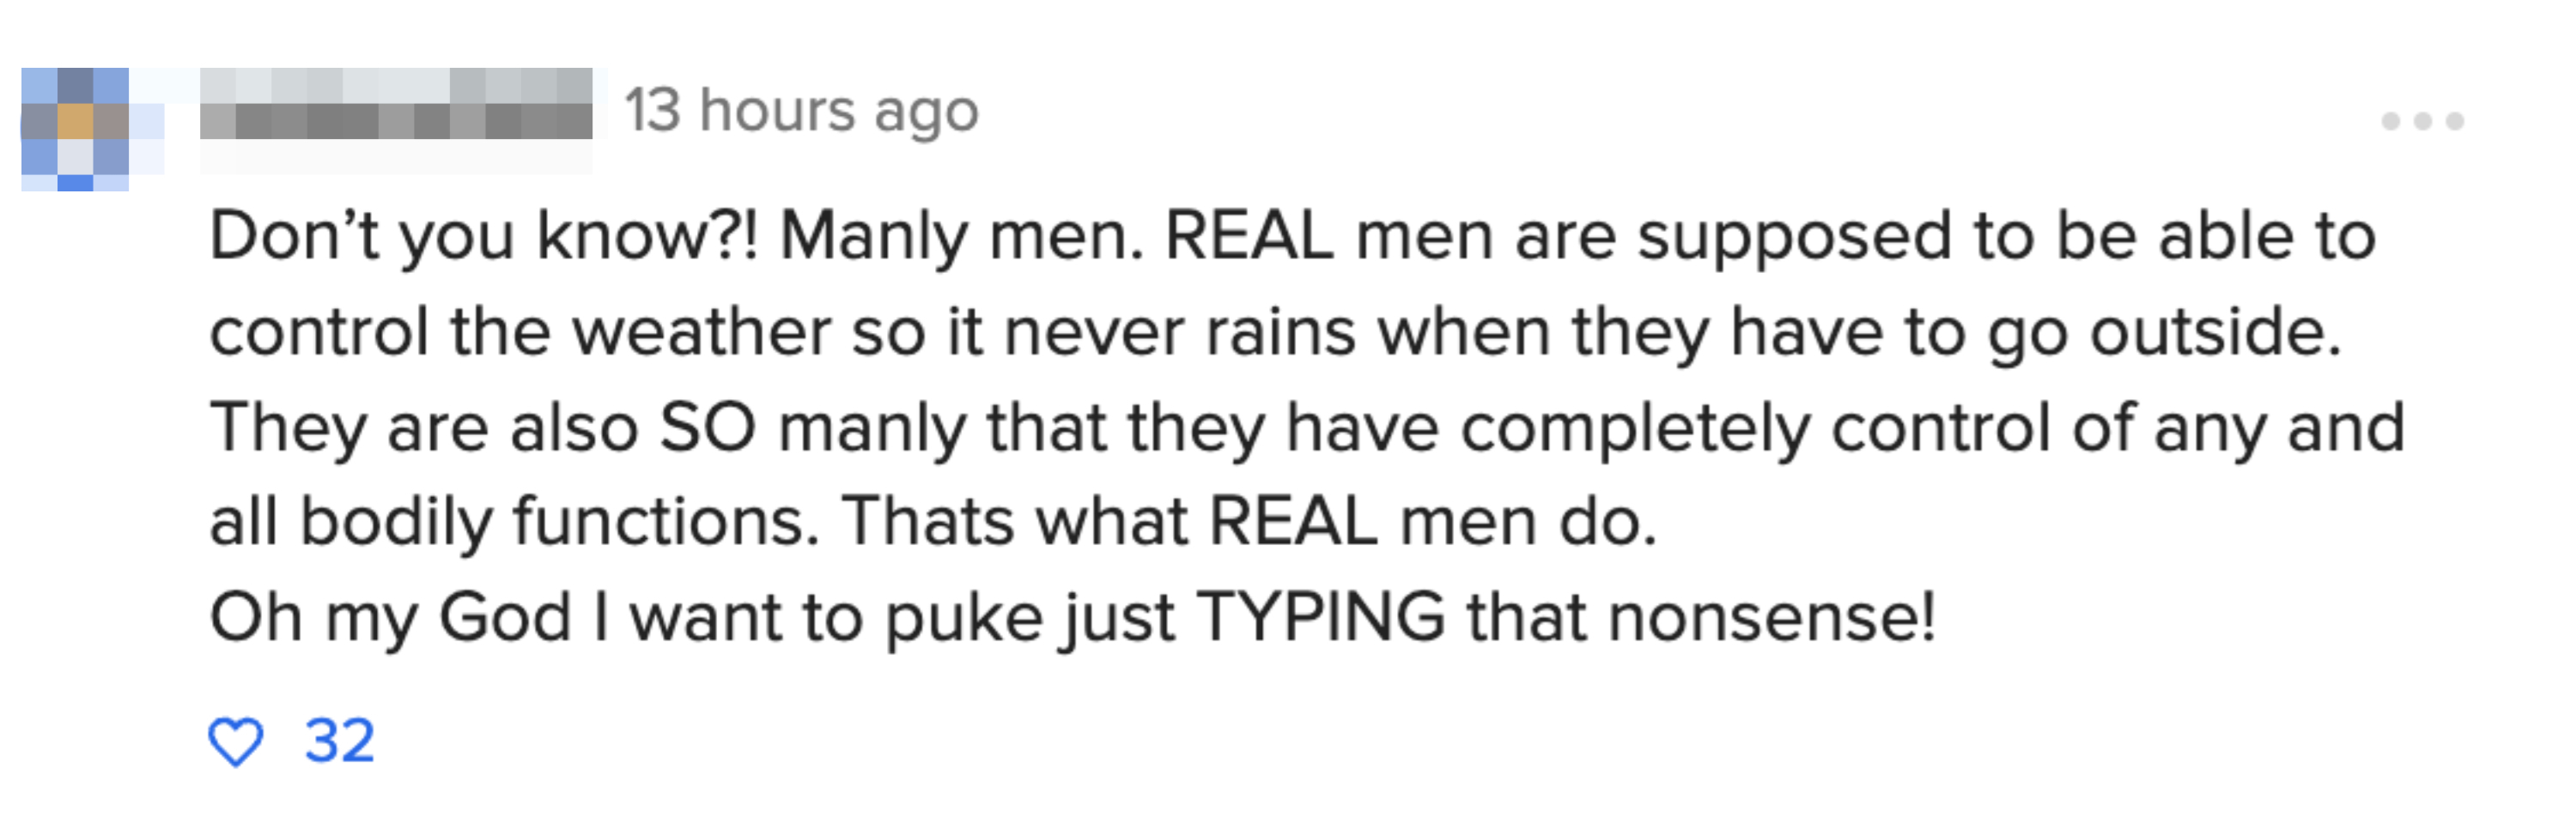 Comment discussing satirical expectations of &#x27;real men,&#x27; expressing disbelief and disgust